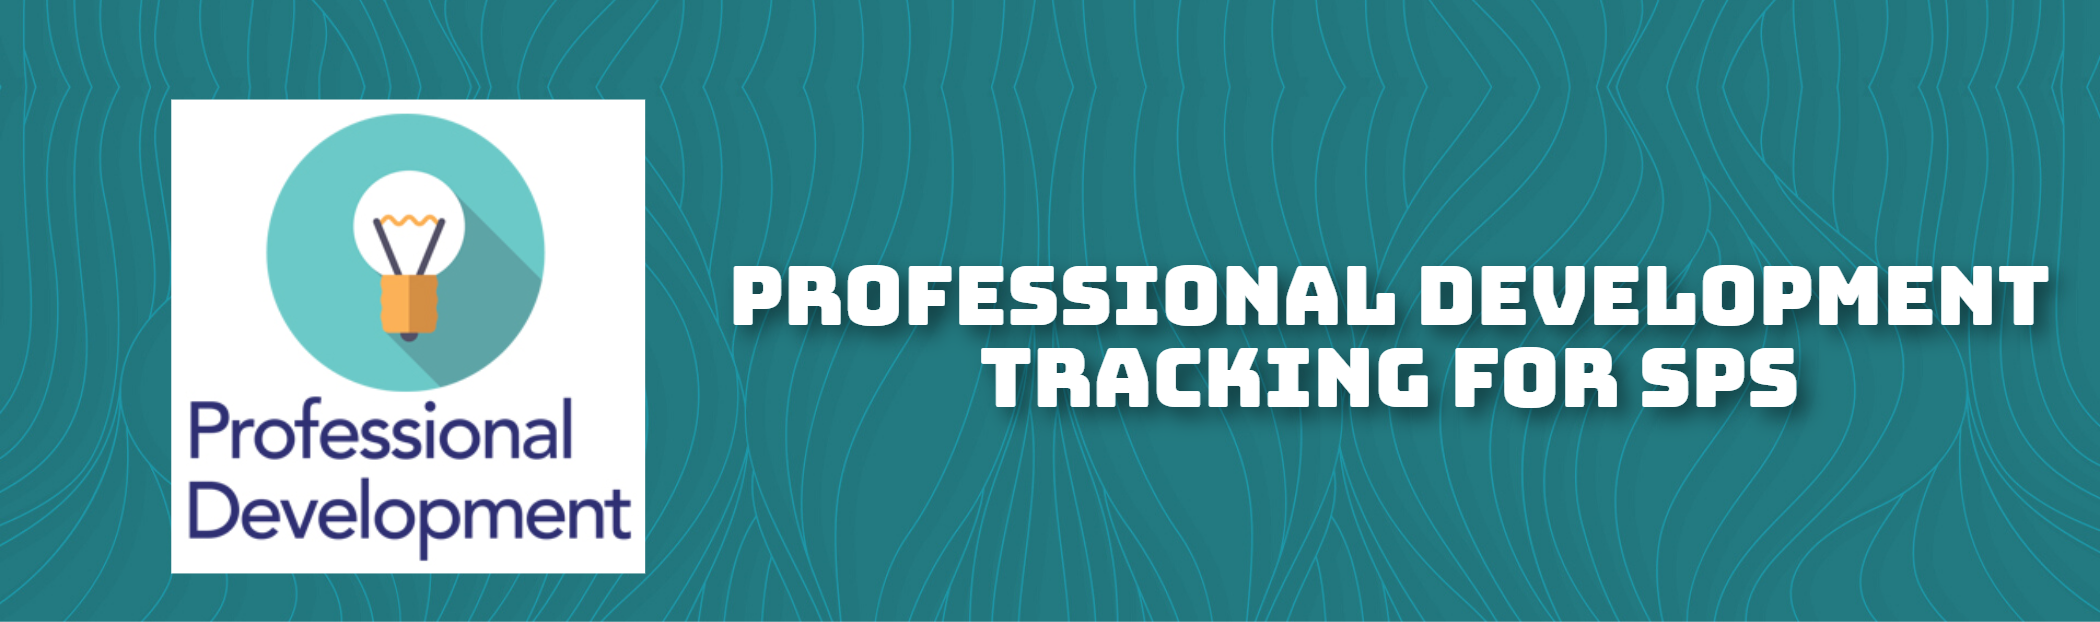 Professional Development Tracking For SPS